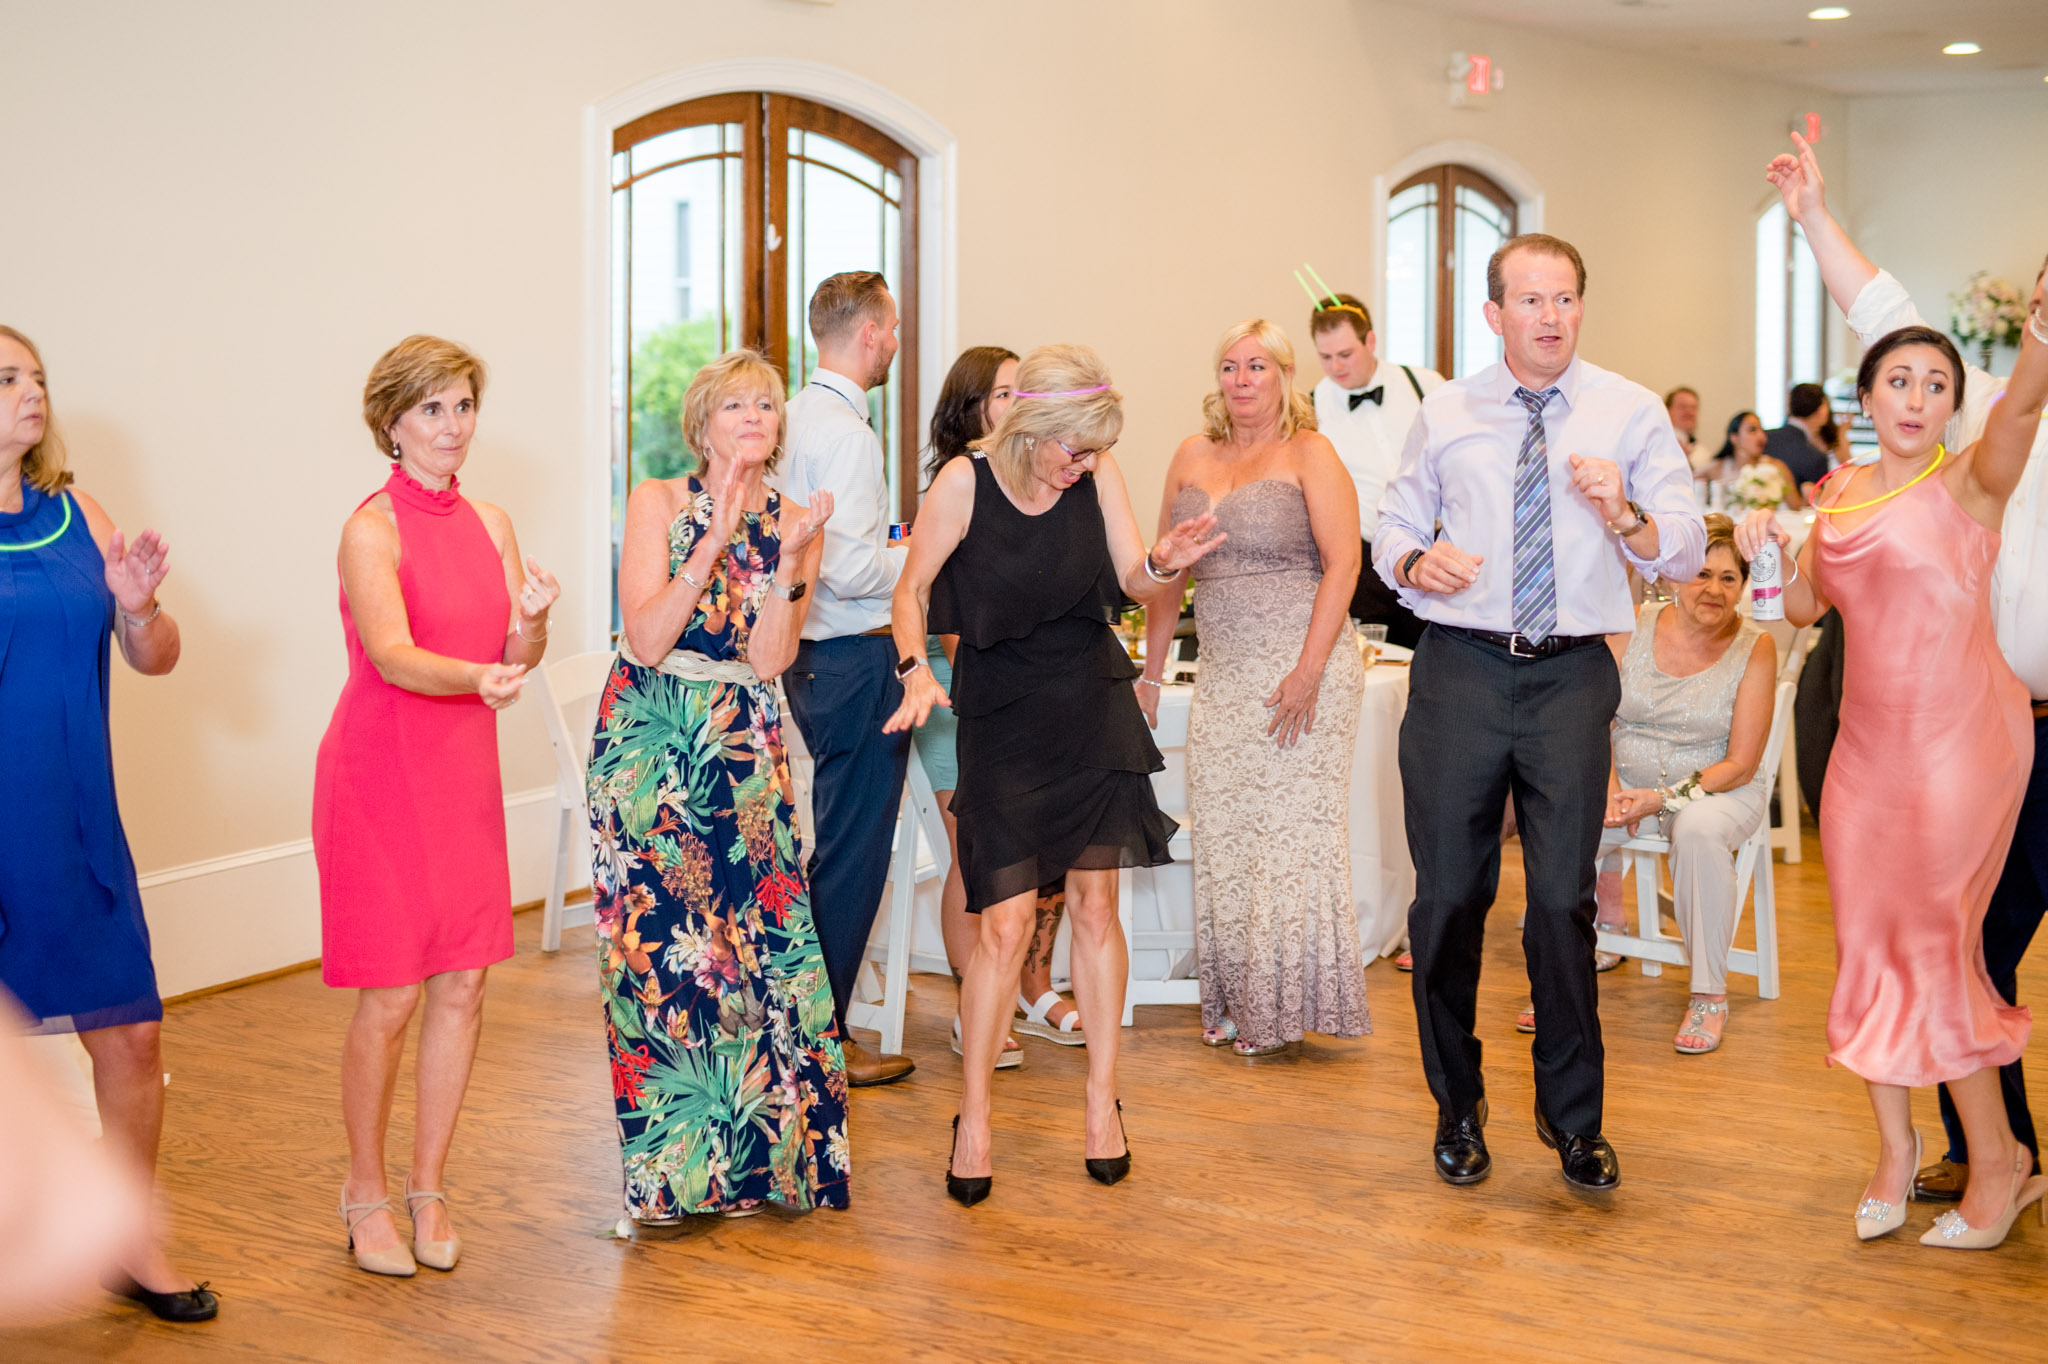 Wedding guests dance at reception.